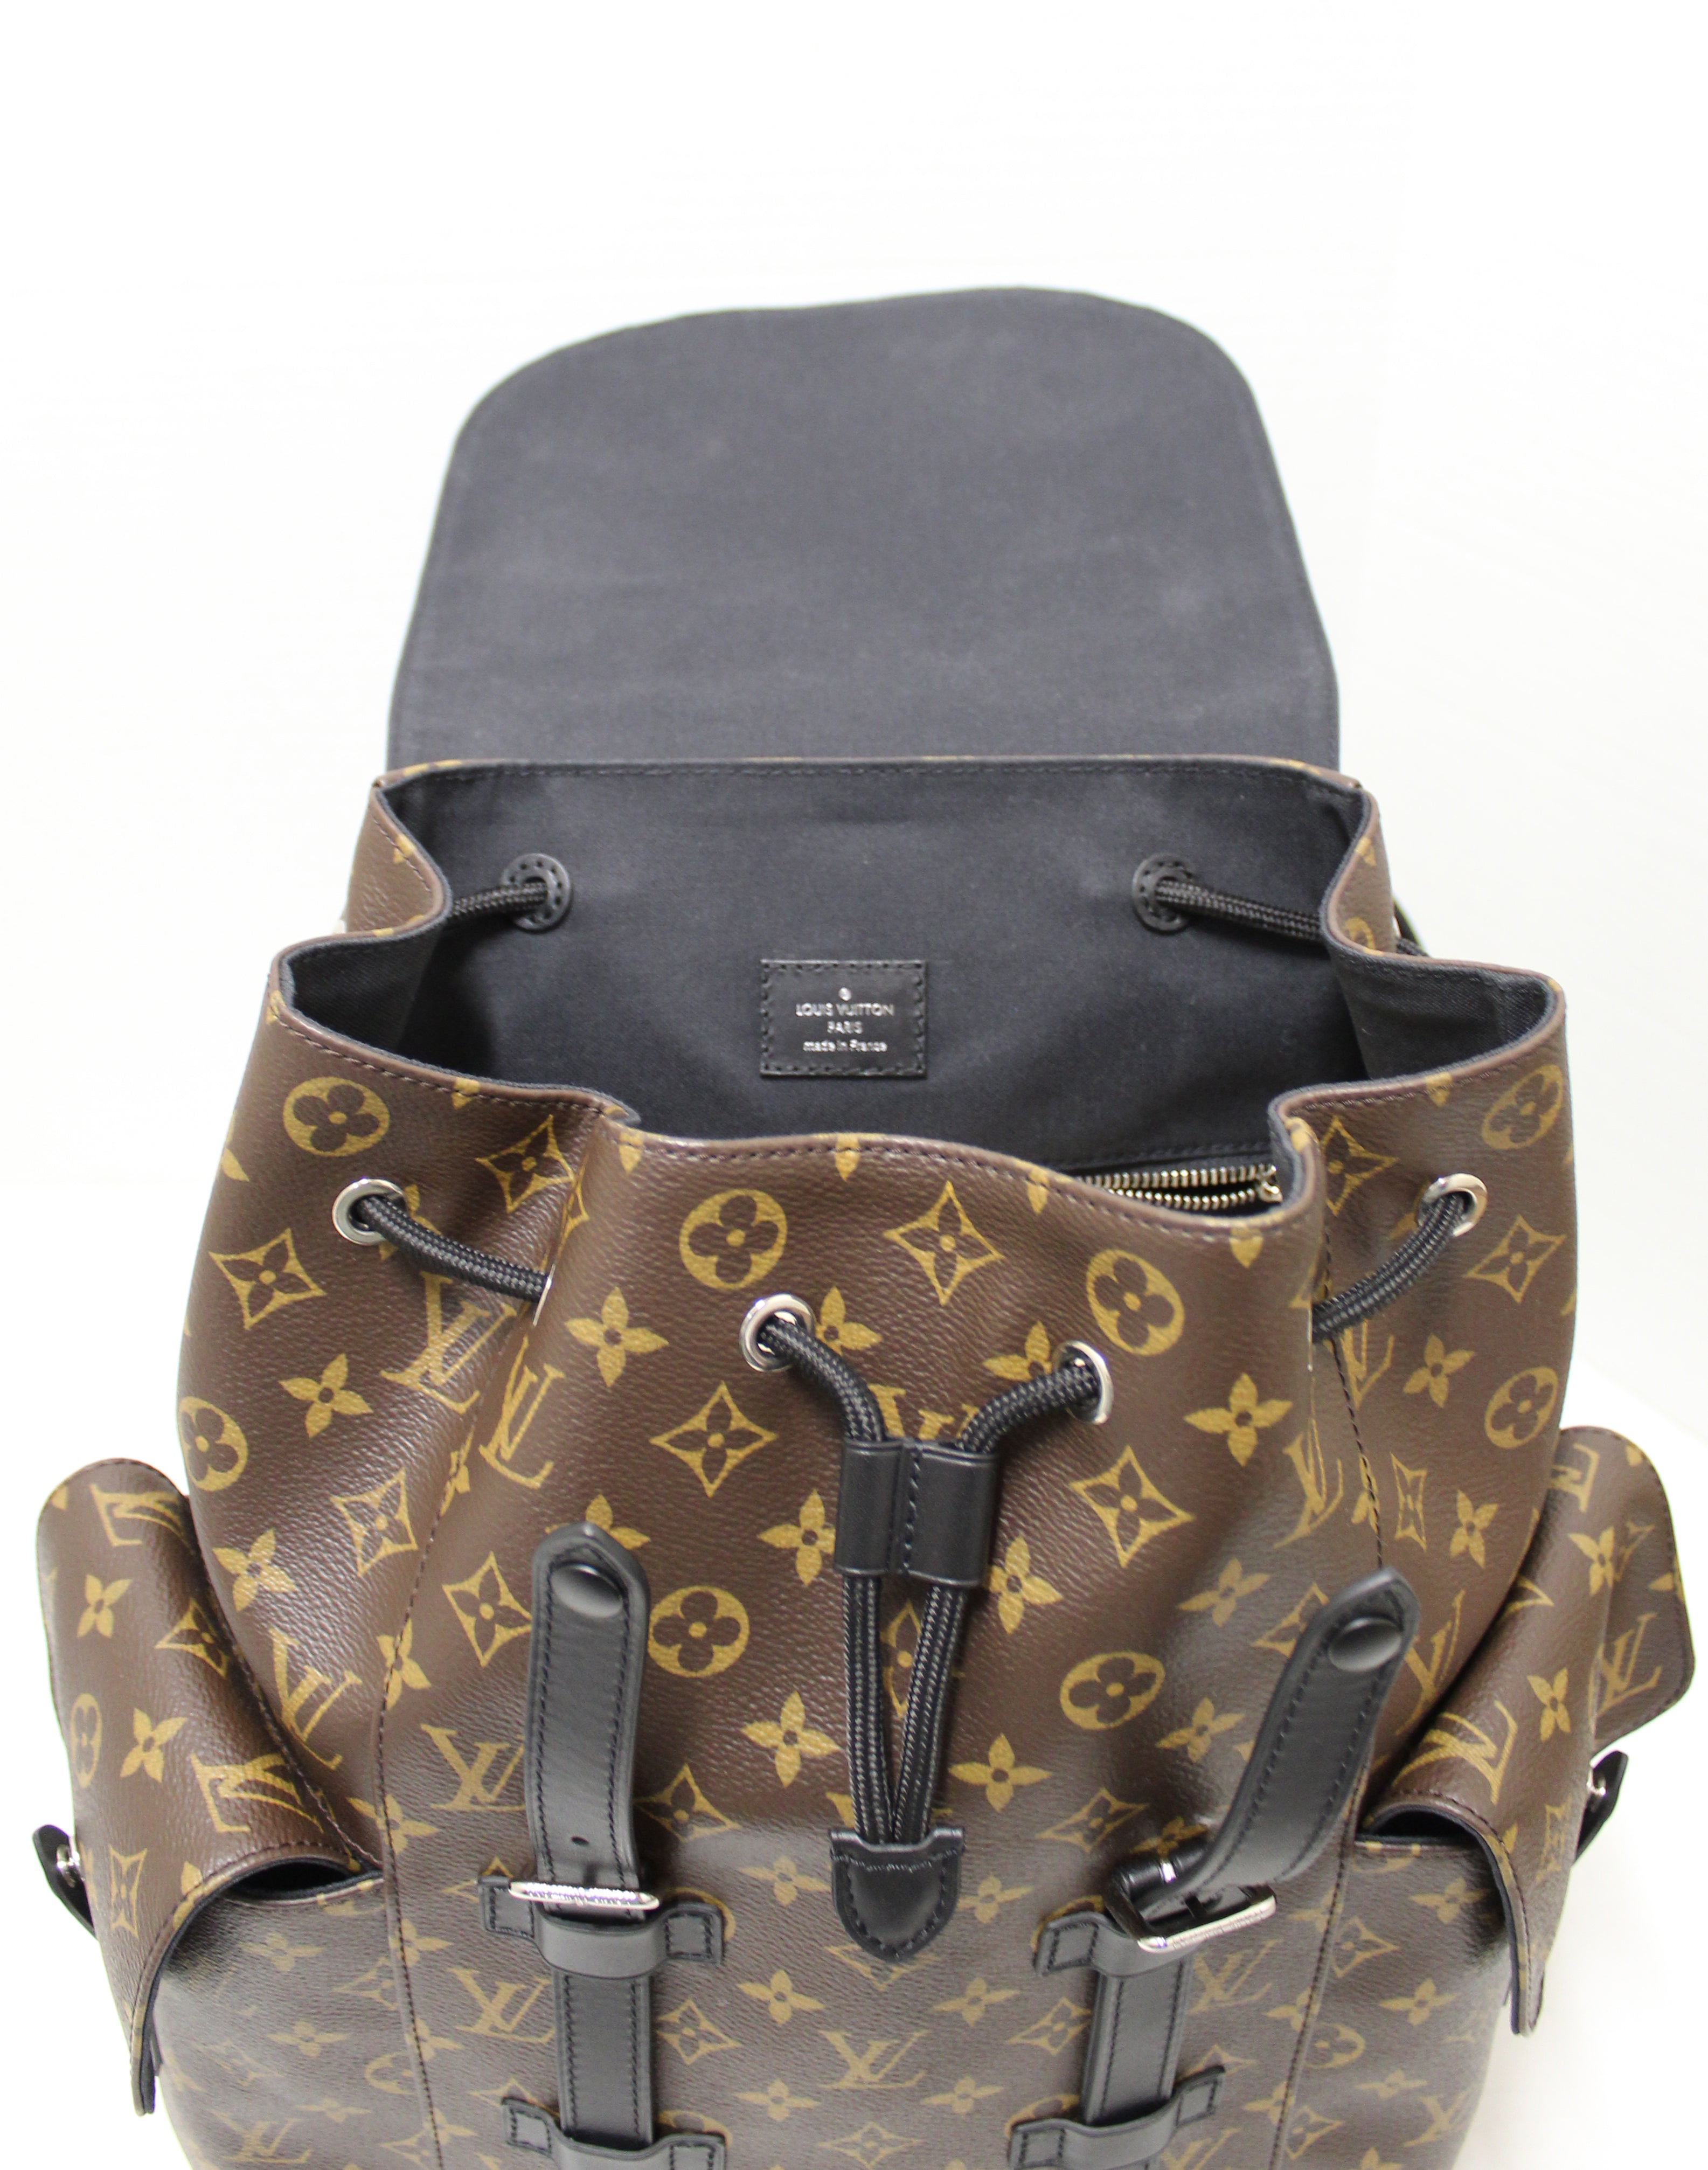 Authentic Louis Vuitton Christopher Macassar Limited Runway Backpack 2004